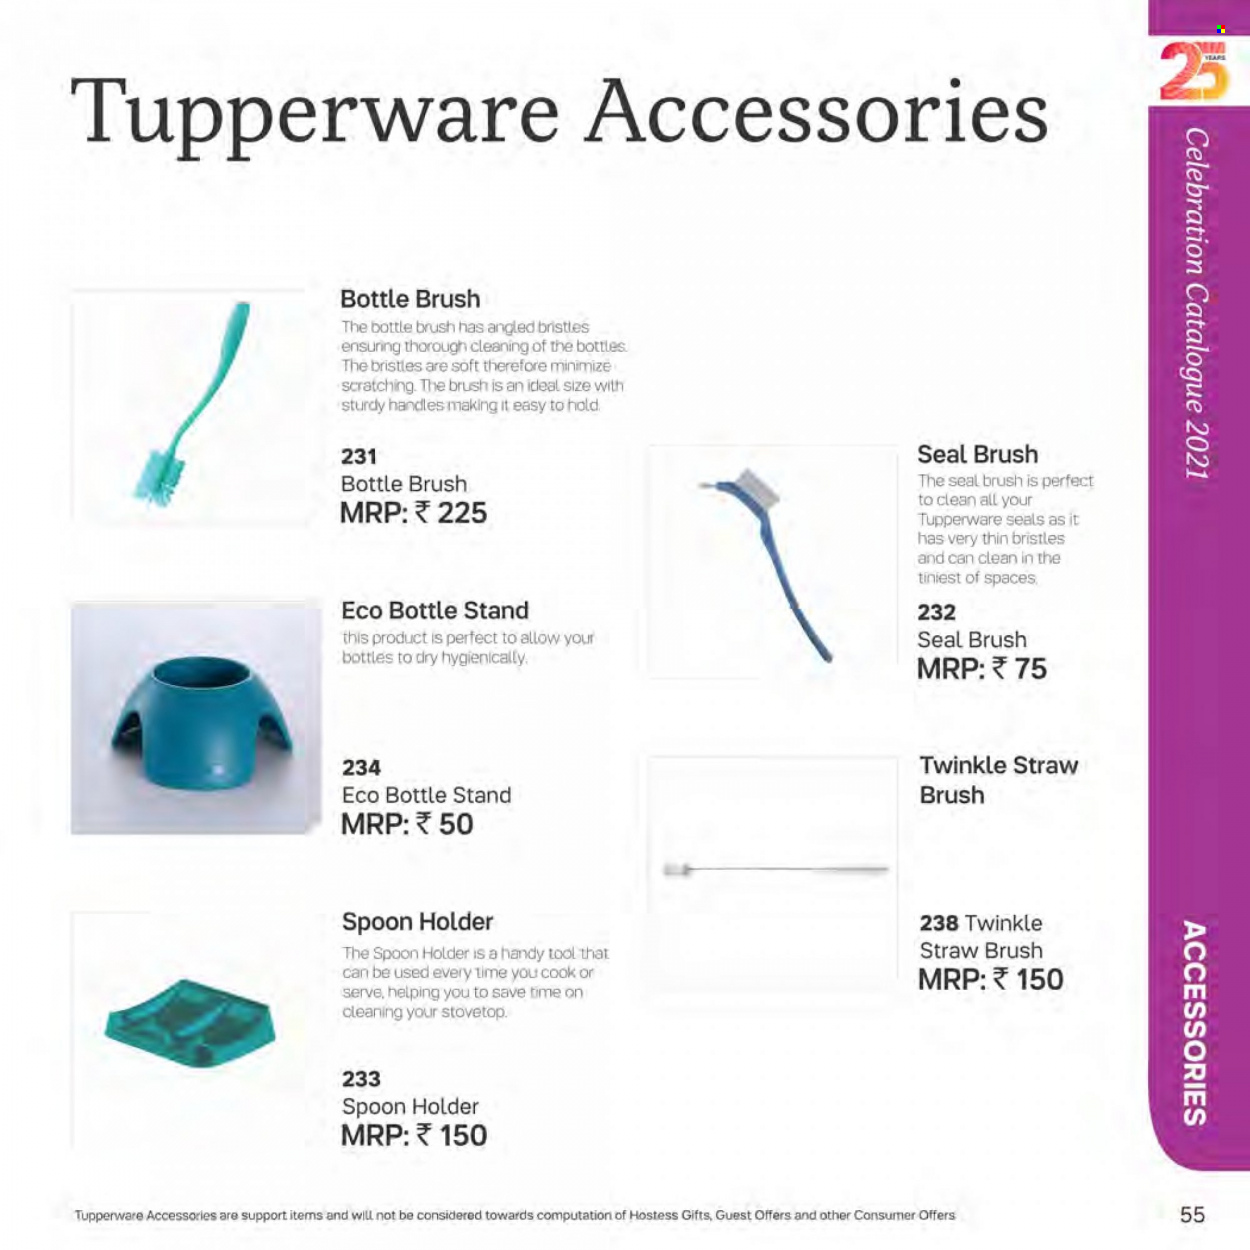 Tupperware offer . Page 55.